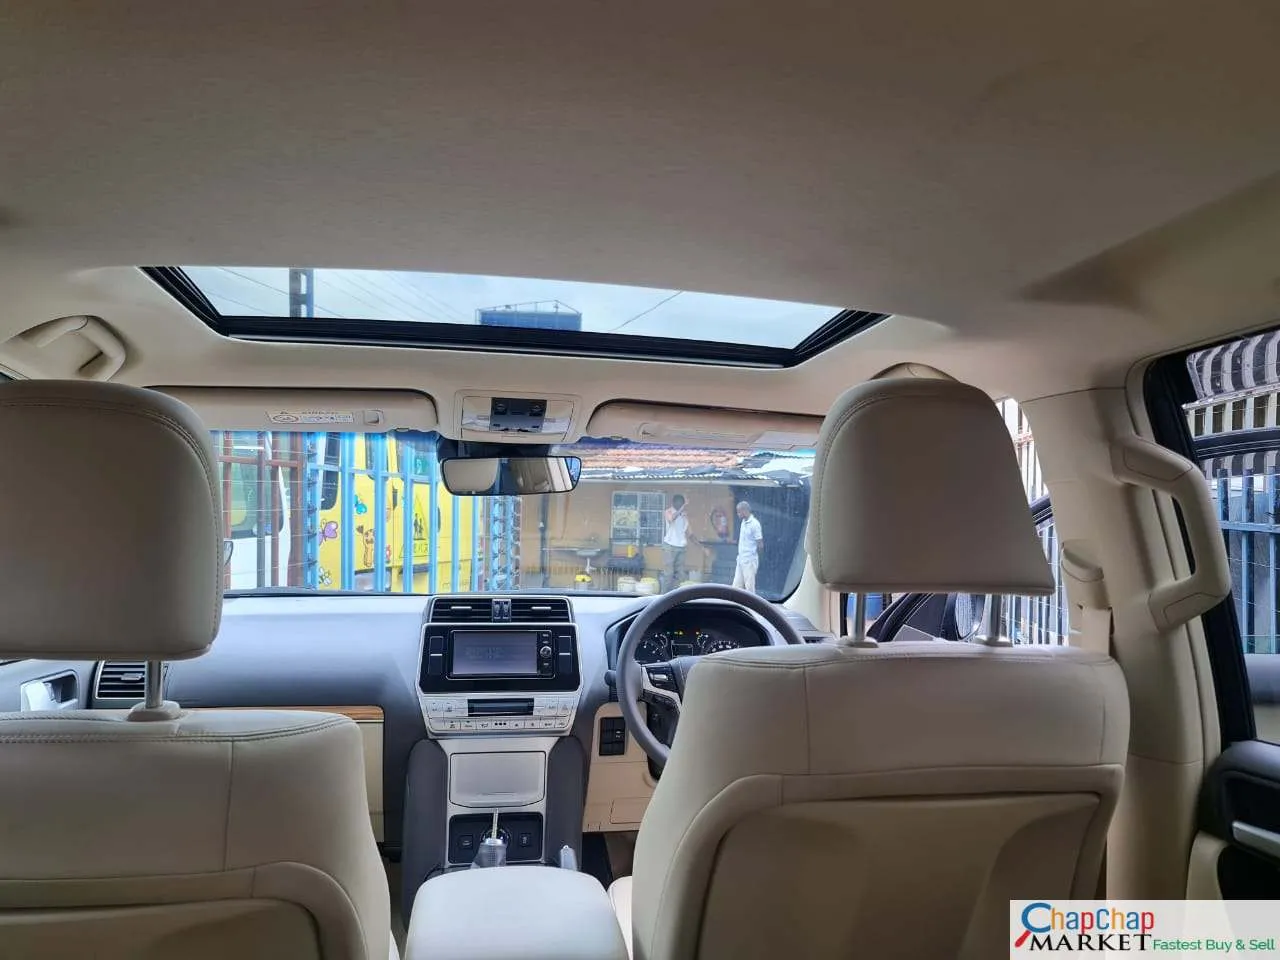 Toyota PRADO 2017 NEW SHAPE Sunroof Leather Quick SALE TRADE IN OK EXCLUSIVE